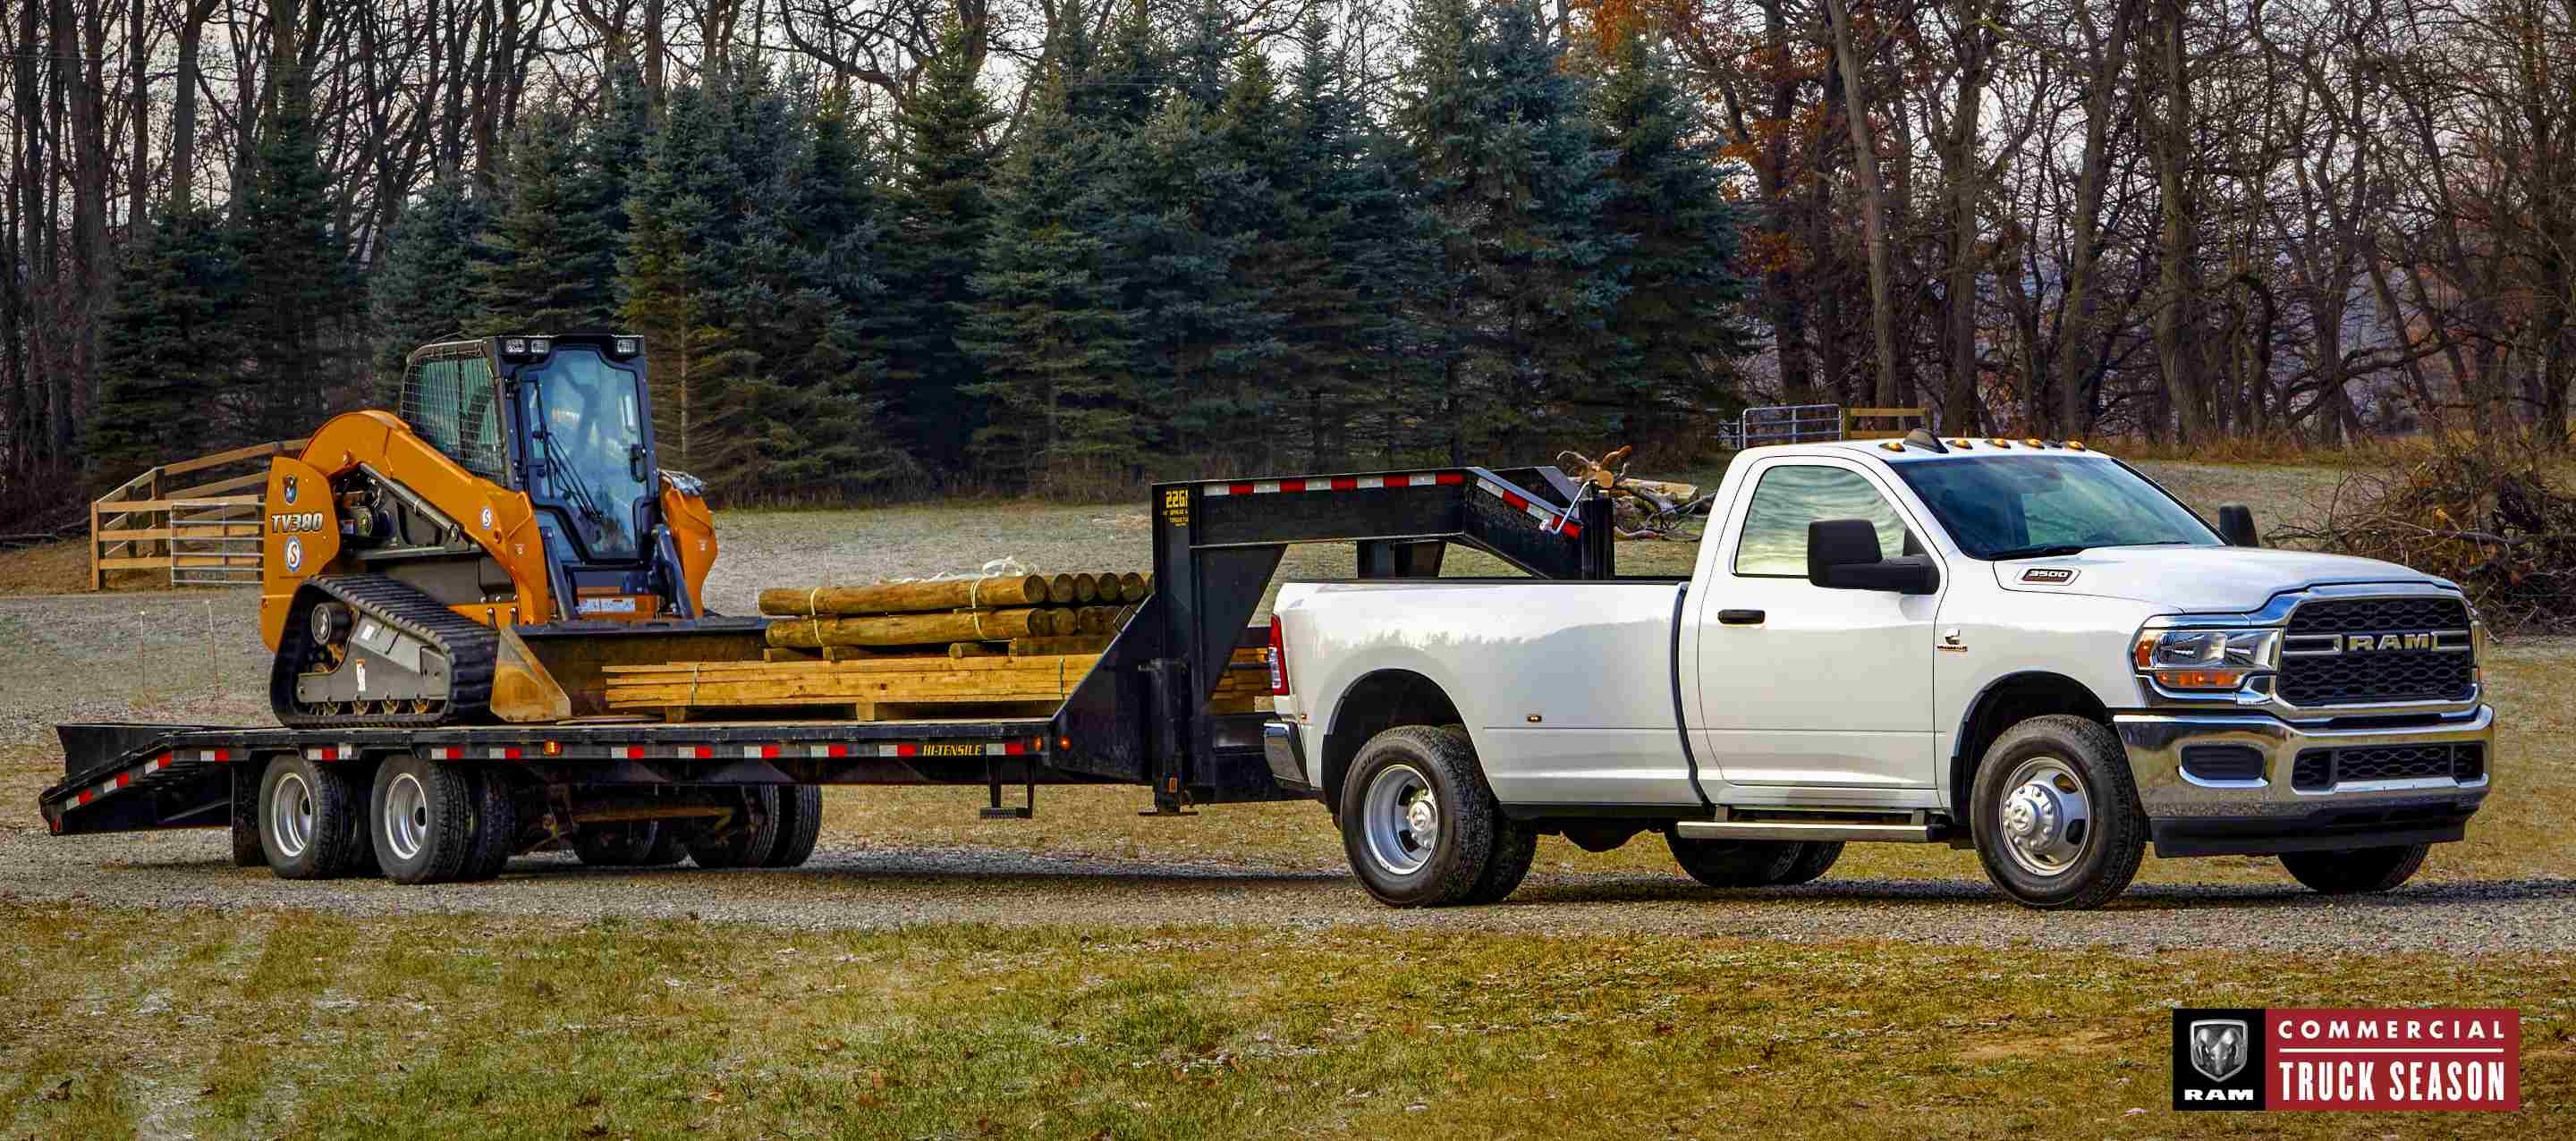 A white 2024 Ram 3500 Tradesman 4x4 Regular Cab towing a fifth wheel flatbed trailer loaded with an excavator and lumber. Ram Commercial Truck Season.